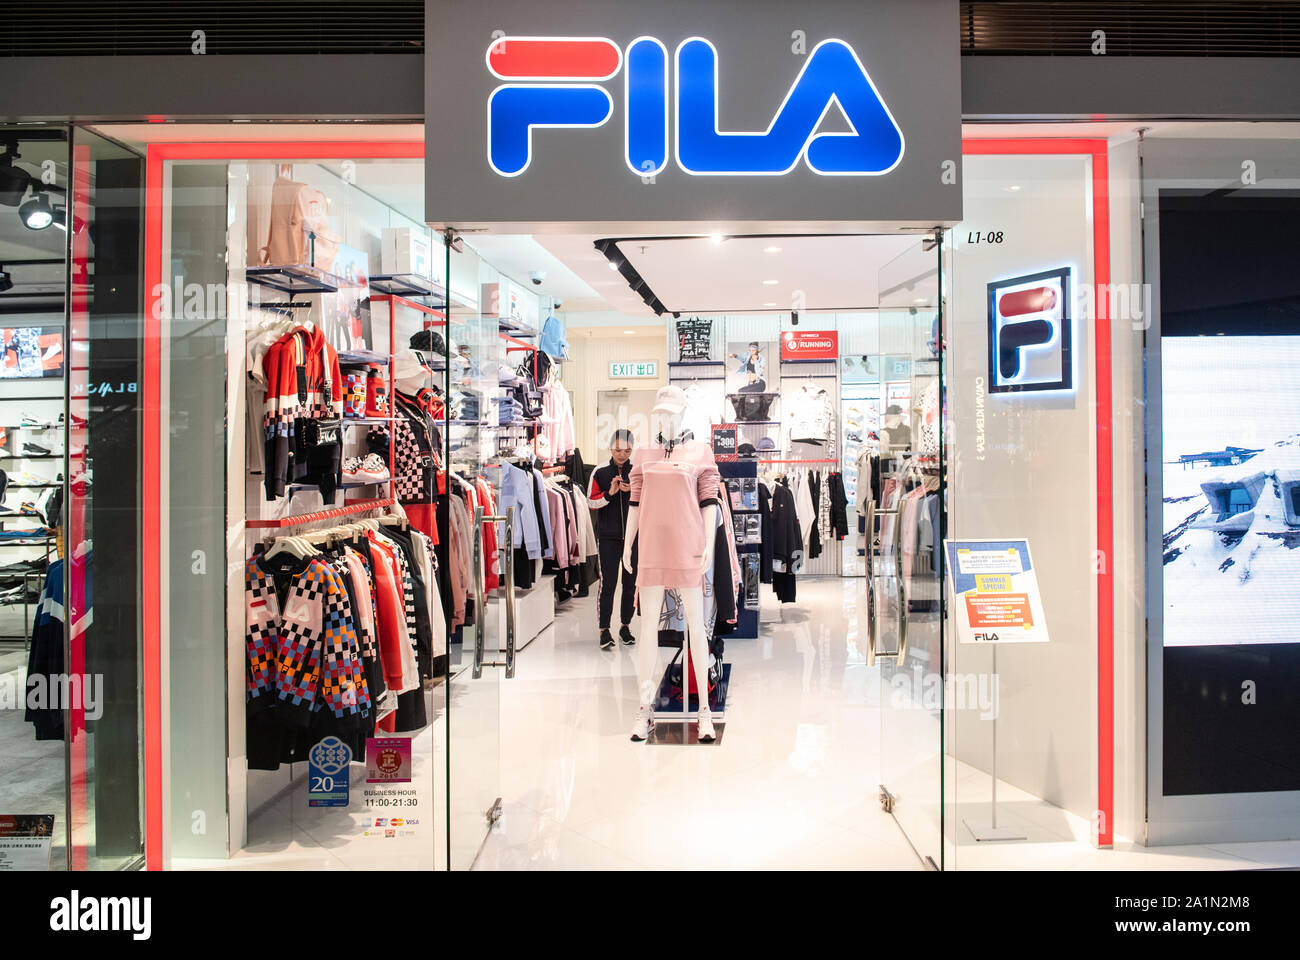 fila apparel near me - Online Discount Shop for Electronics, Apparel, Toys,  Books, Games, Computers, Shoes, Jewelry, Watches, Baby Products, Sports &  Outdoors, Office Products, Bed & Bath, Furniture, Tools, Hardware,  Automotive